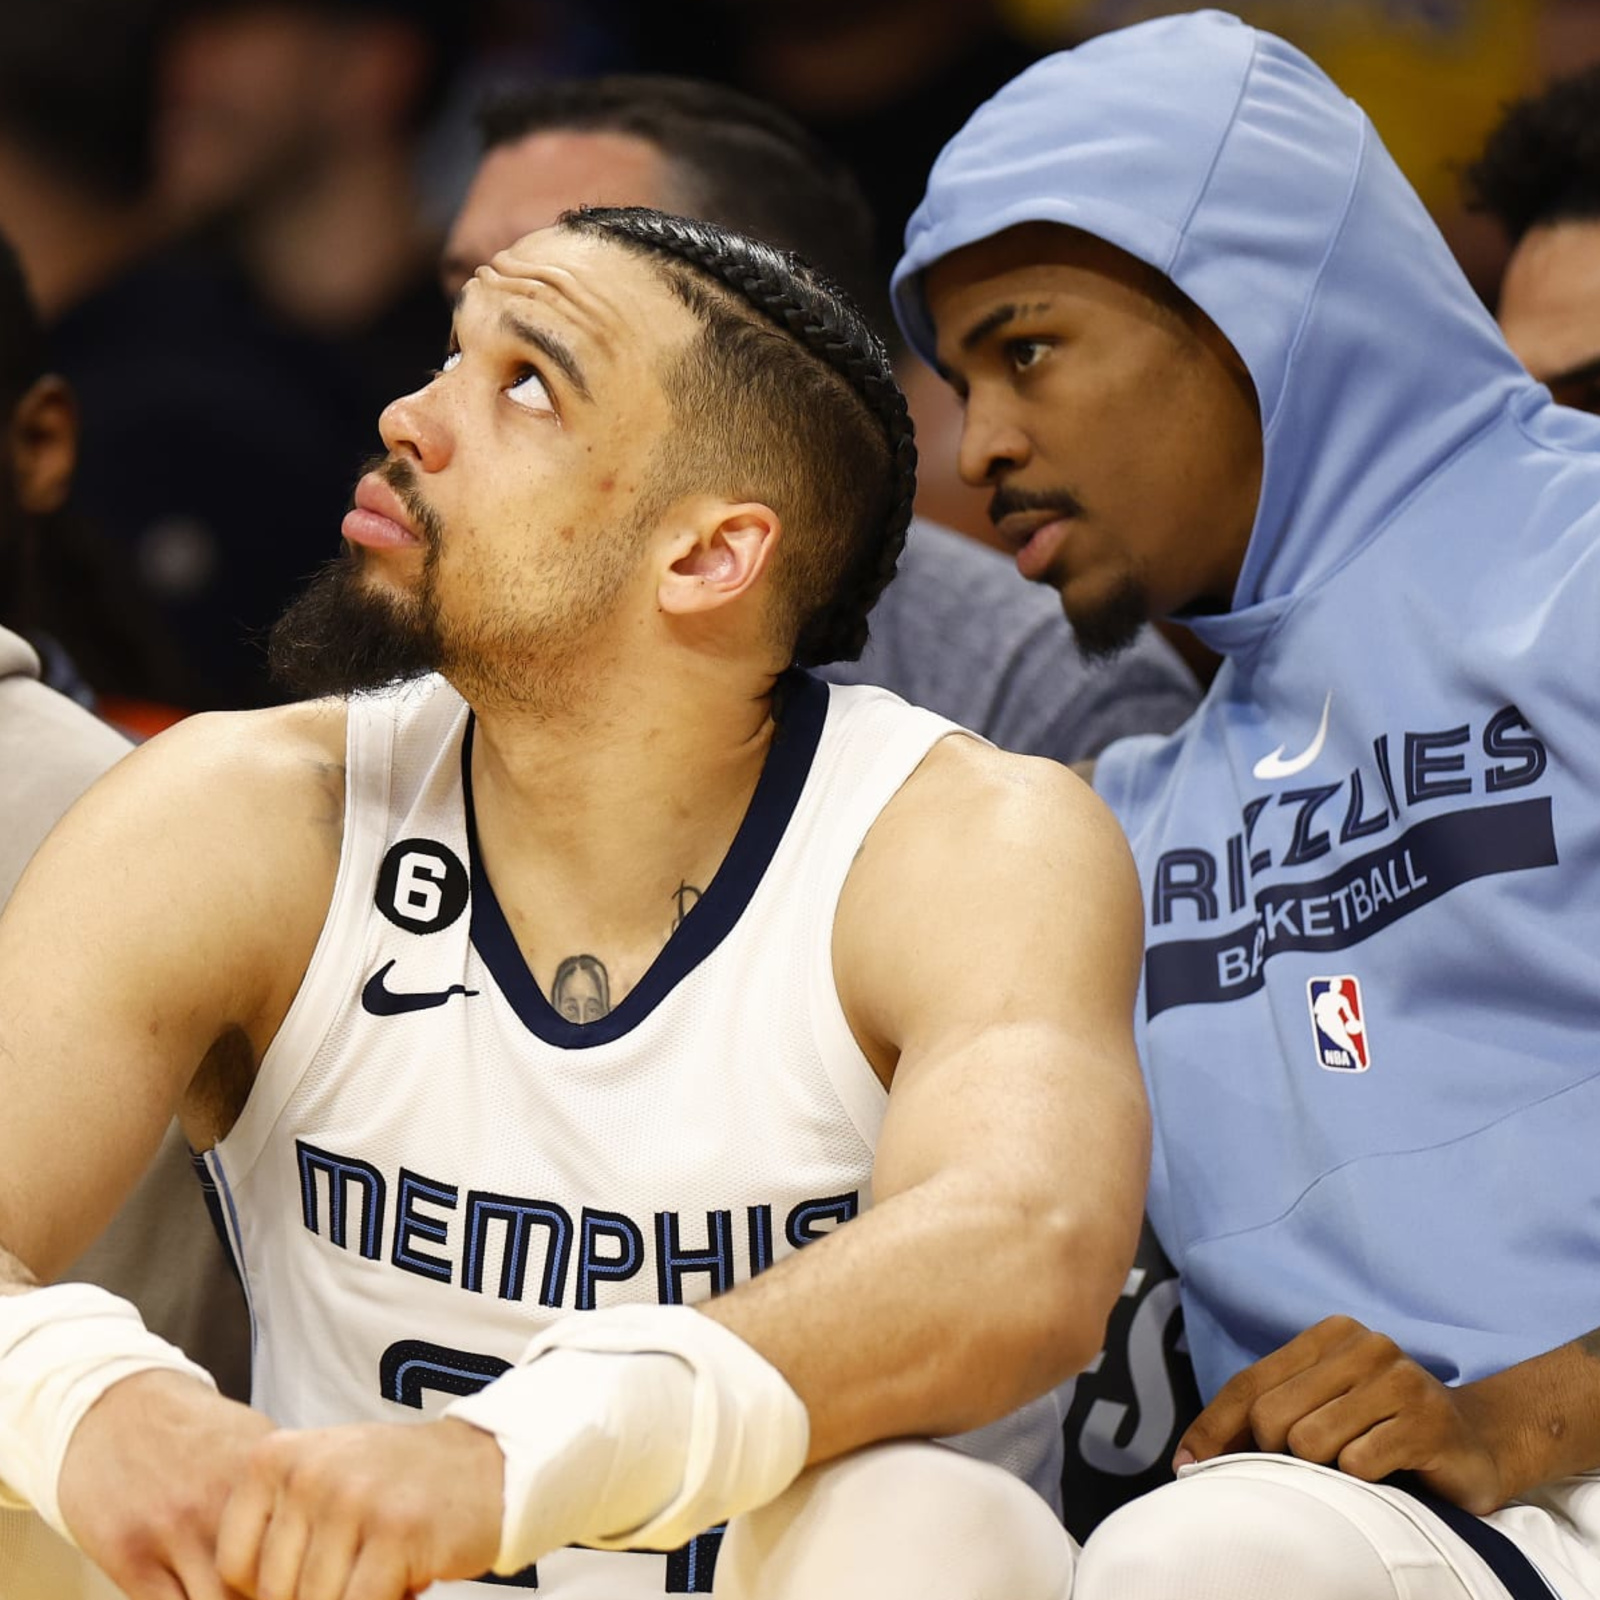 Brooks closer to returning to Grizzlies lineup